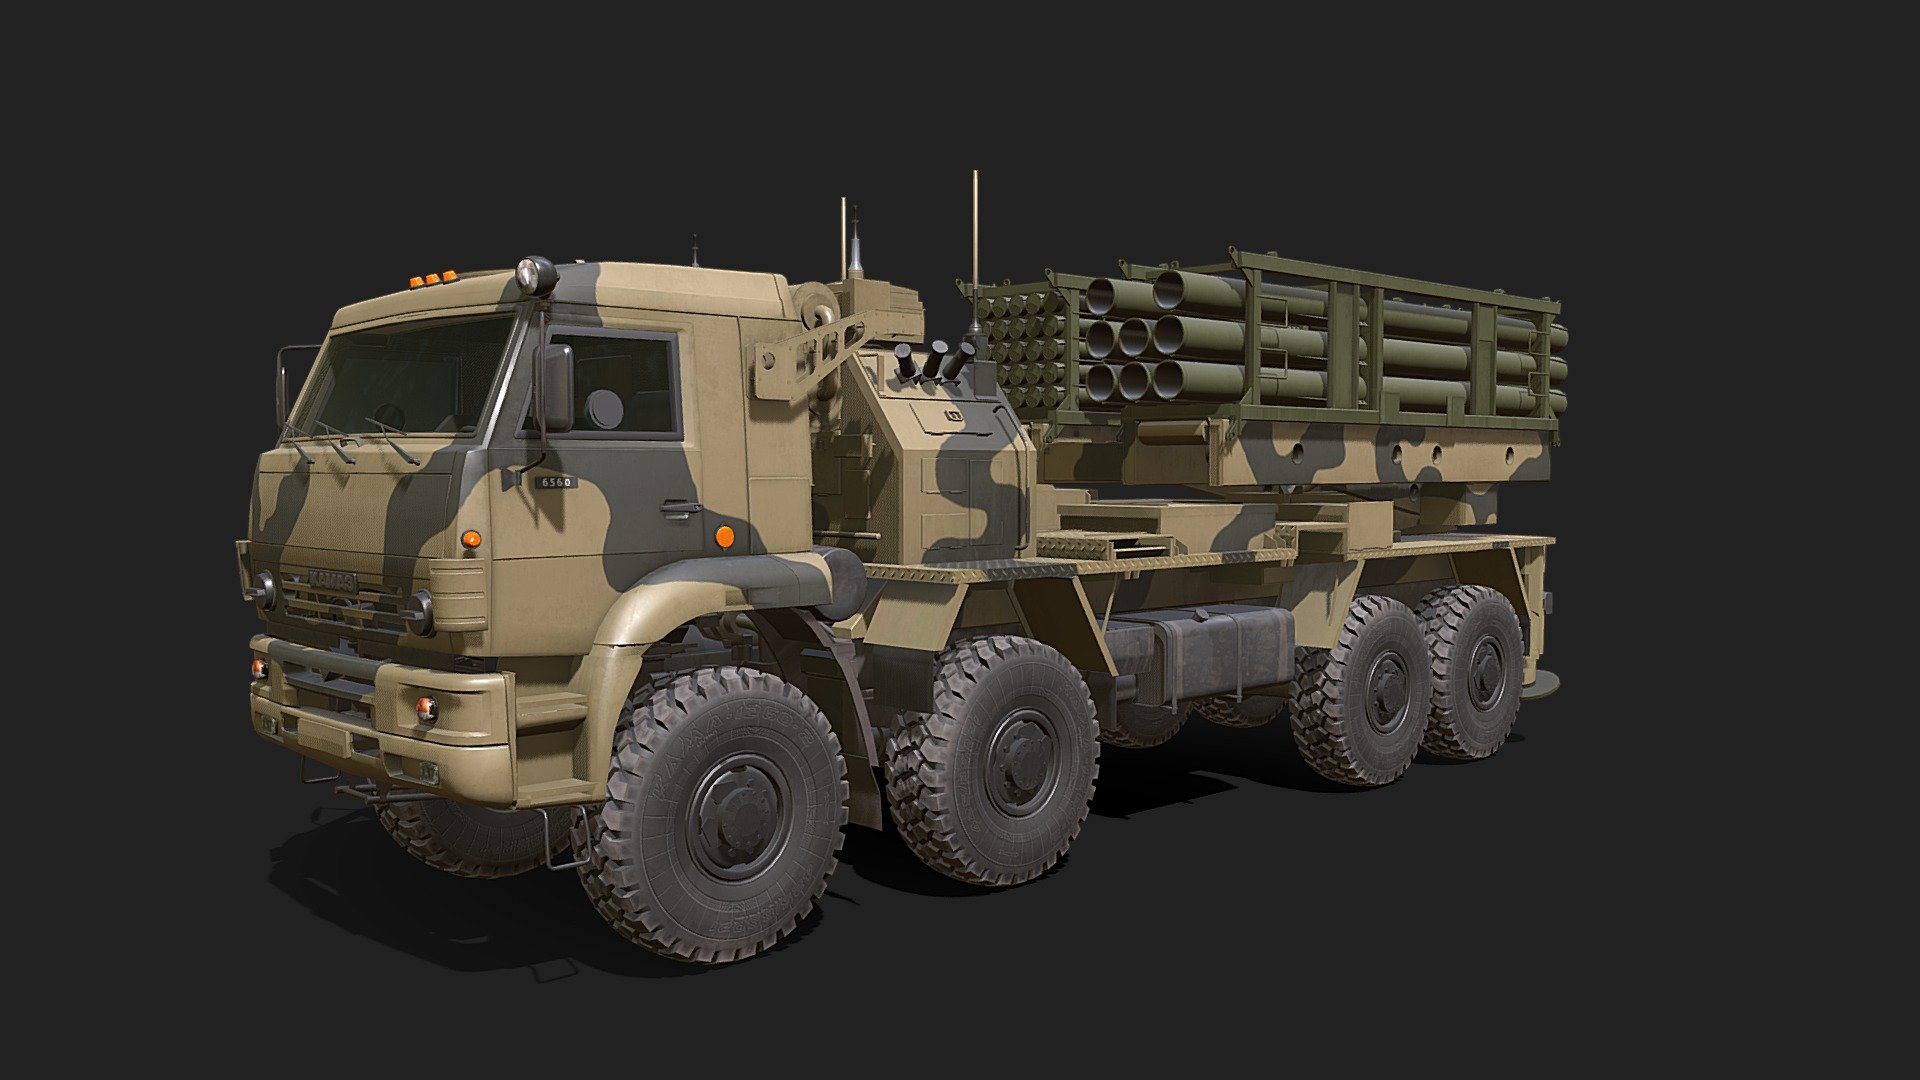 Russian designers have developed a new complex based on the “Agriculture” remote mining system, installing a unified transport and launch container on the vehicle. The new complex is capable of mining terrain using 140 mm caliber rockets, and also operates as an MLRS, hitting targets with 220 mm caliber ammunition. At the same time, it can use ammunition from both the Uragan MLRS and the Solntsepek heavy flamethrower systems, etc. Other details have not yet been disclosed. The complex was named &ldquo;Renaissance